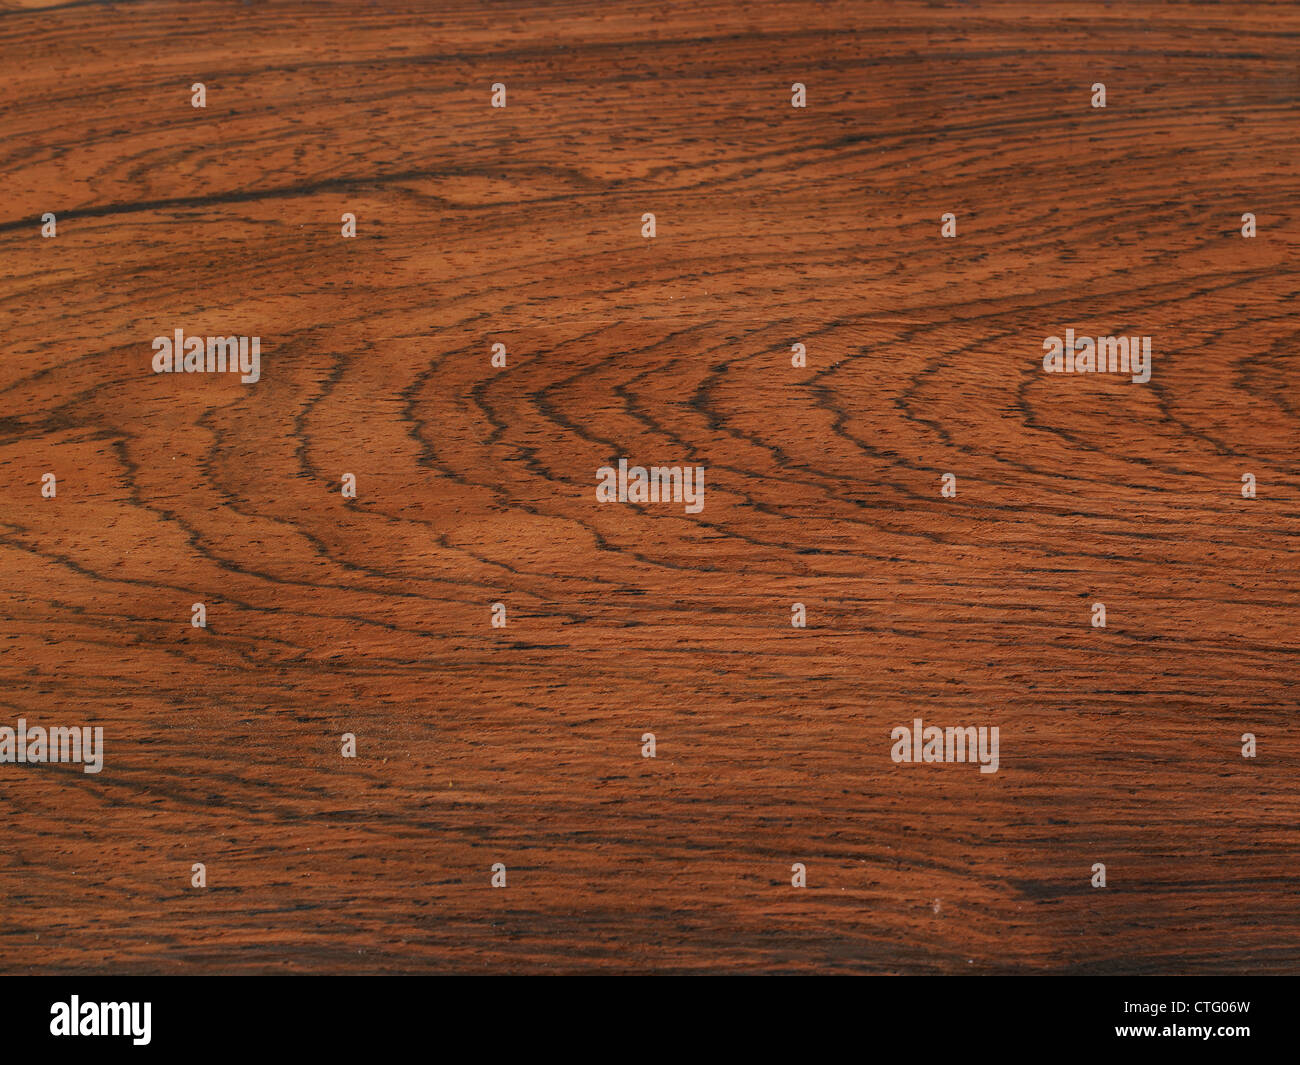 Wood grain table background Stock Photo